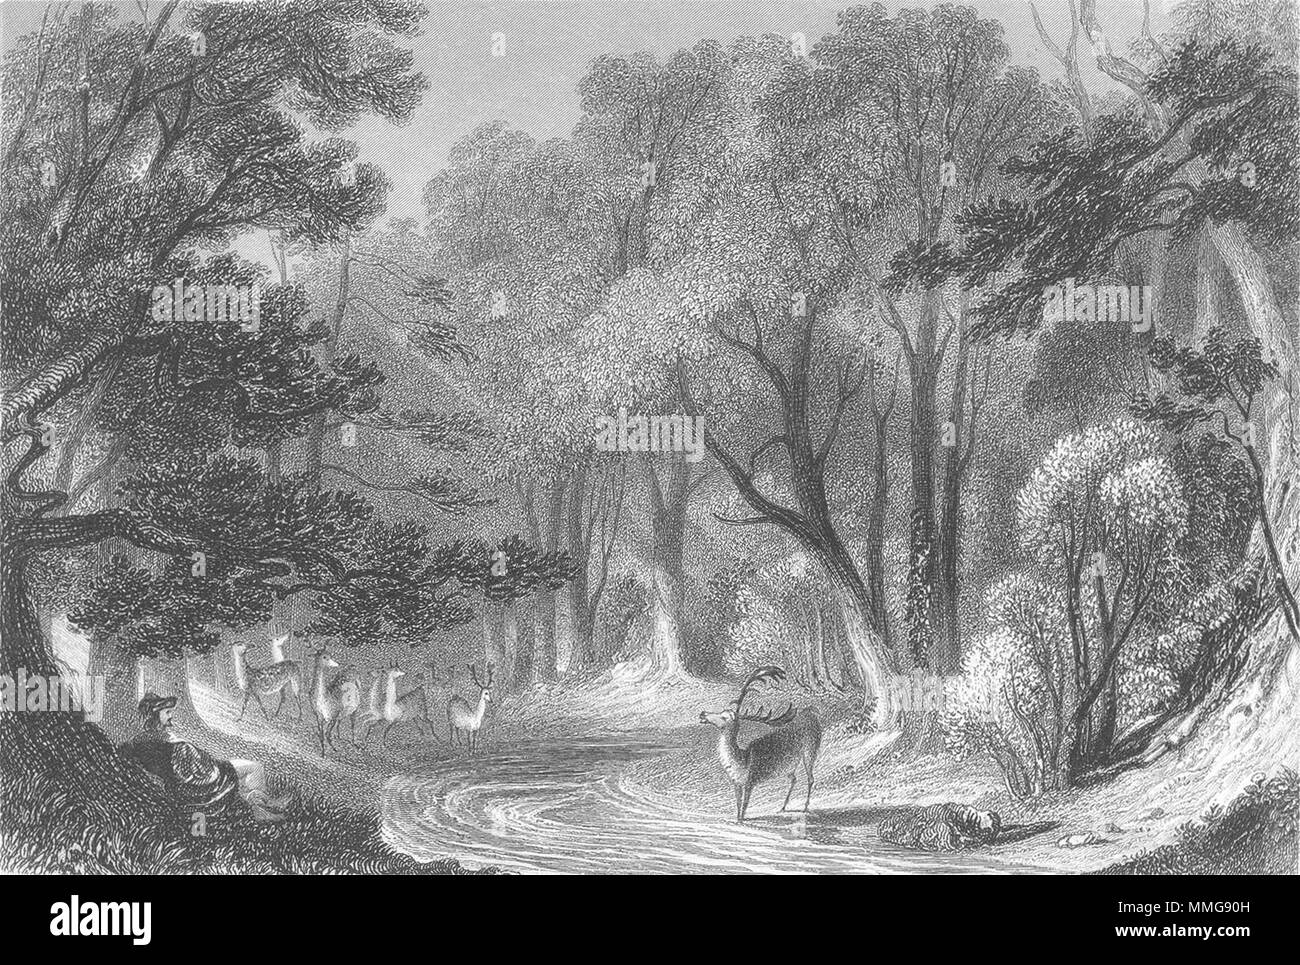 WARCS. Forest of Arden. Sargent Deer 1854 antica vintage delle immagini di stampa Foto Stock